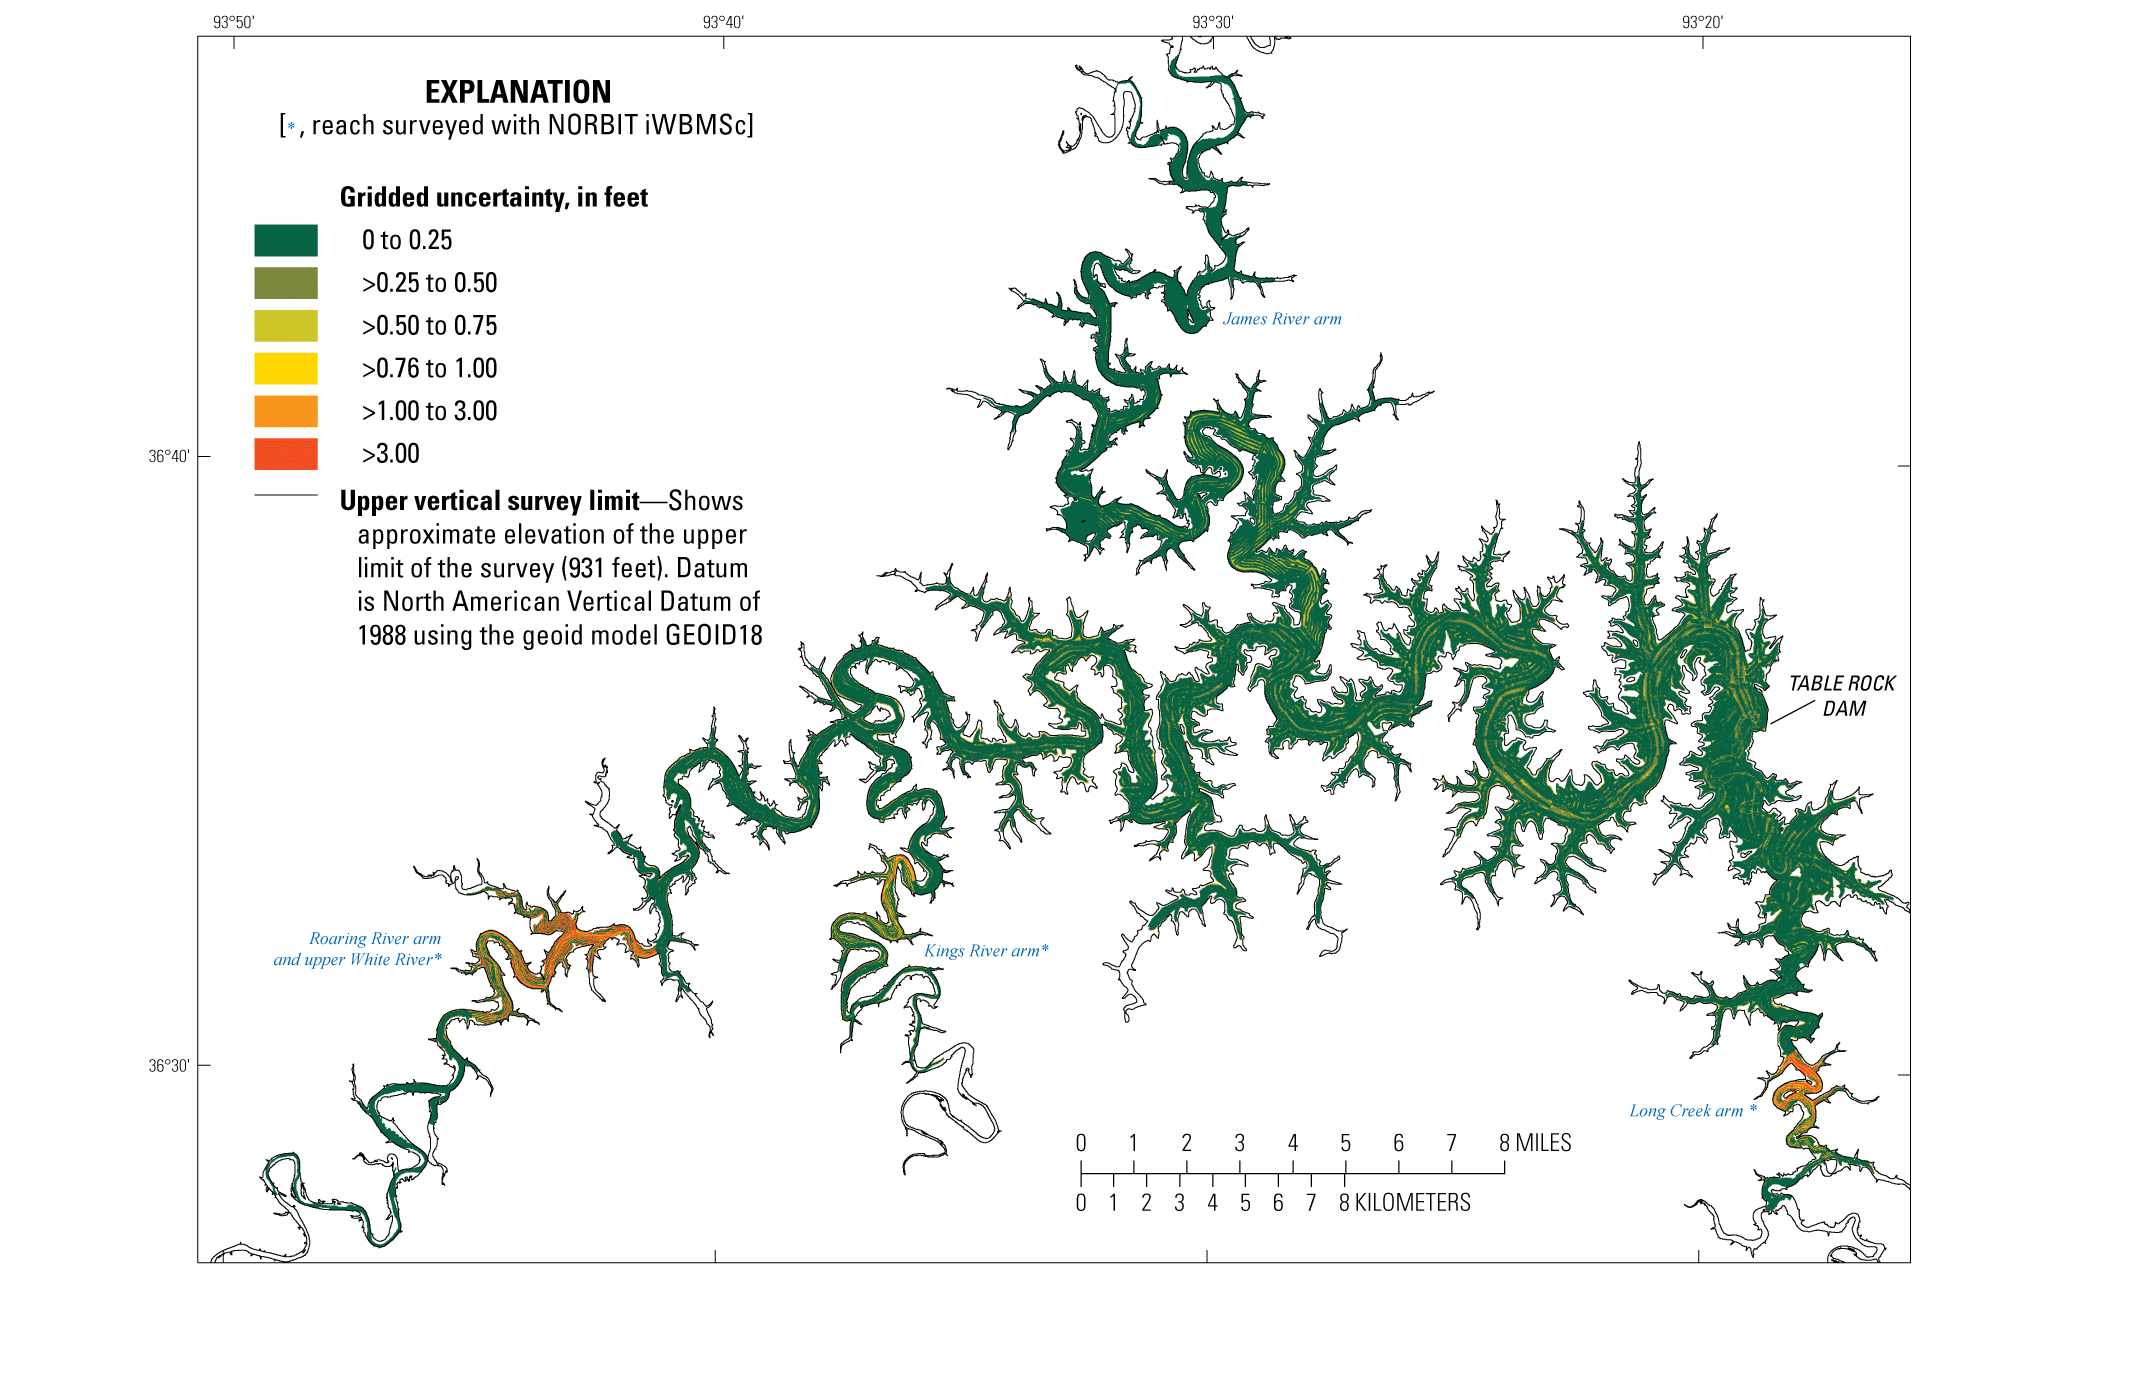 Distribution of uncertainty, ranging from 0 to >3.00 feet, at Table Rock Lake near
                        Branson, Missouri.